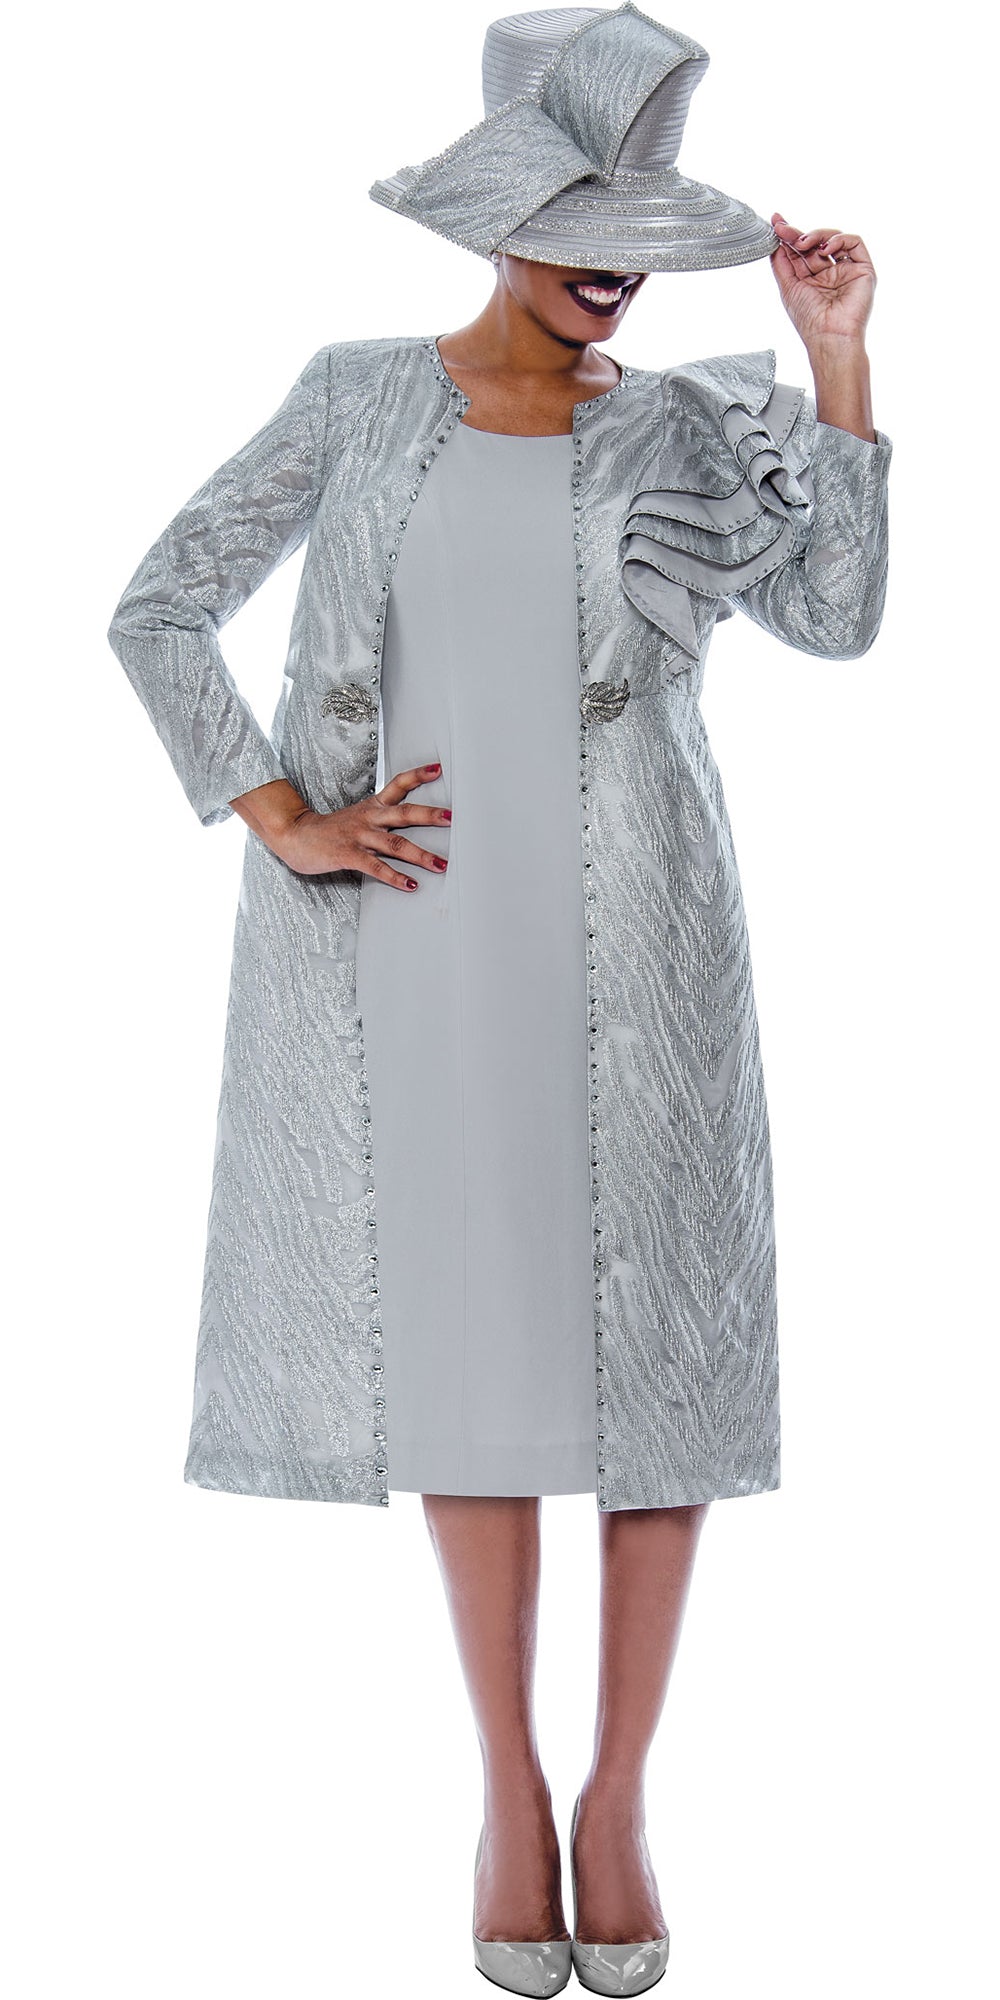 Divine Queen 2262 - Light Silver - 2PC Metallic Jacquard Jacket With Shoulder Ruffle and Silky Twill Dress